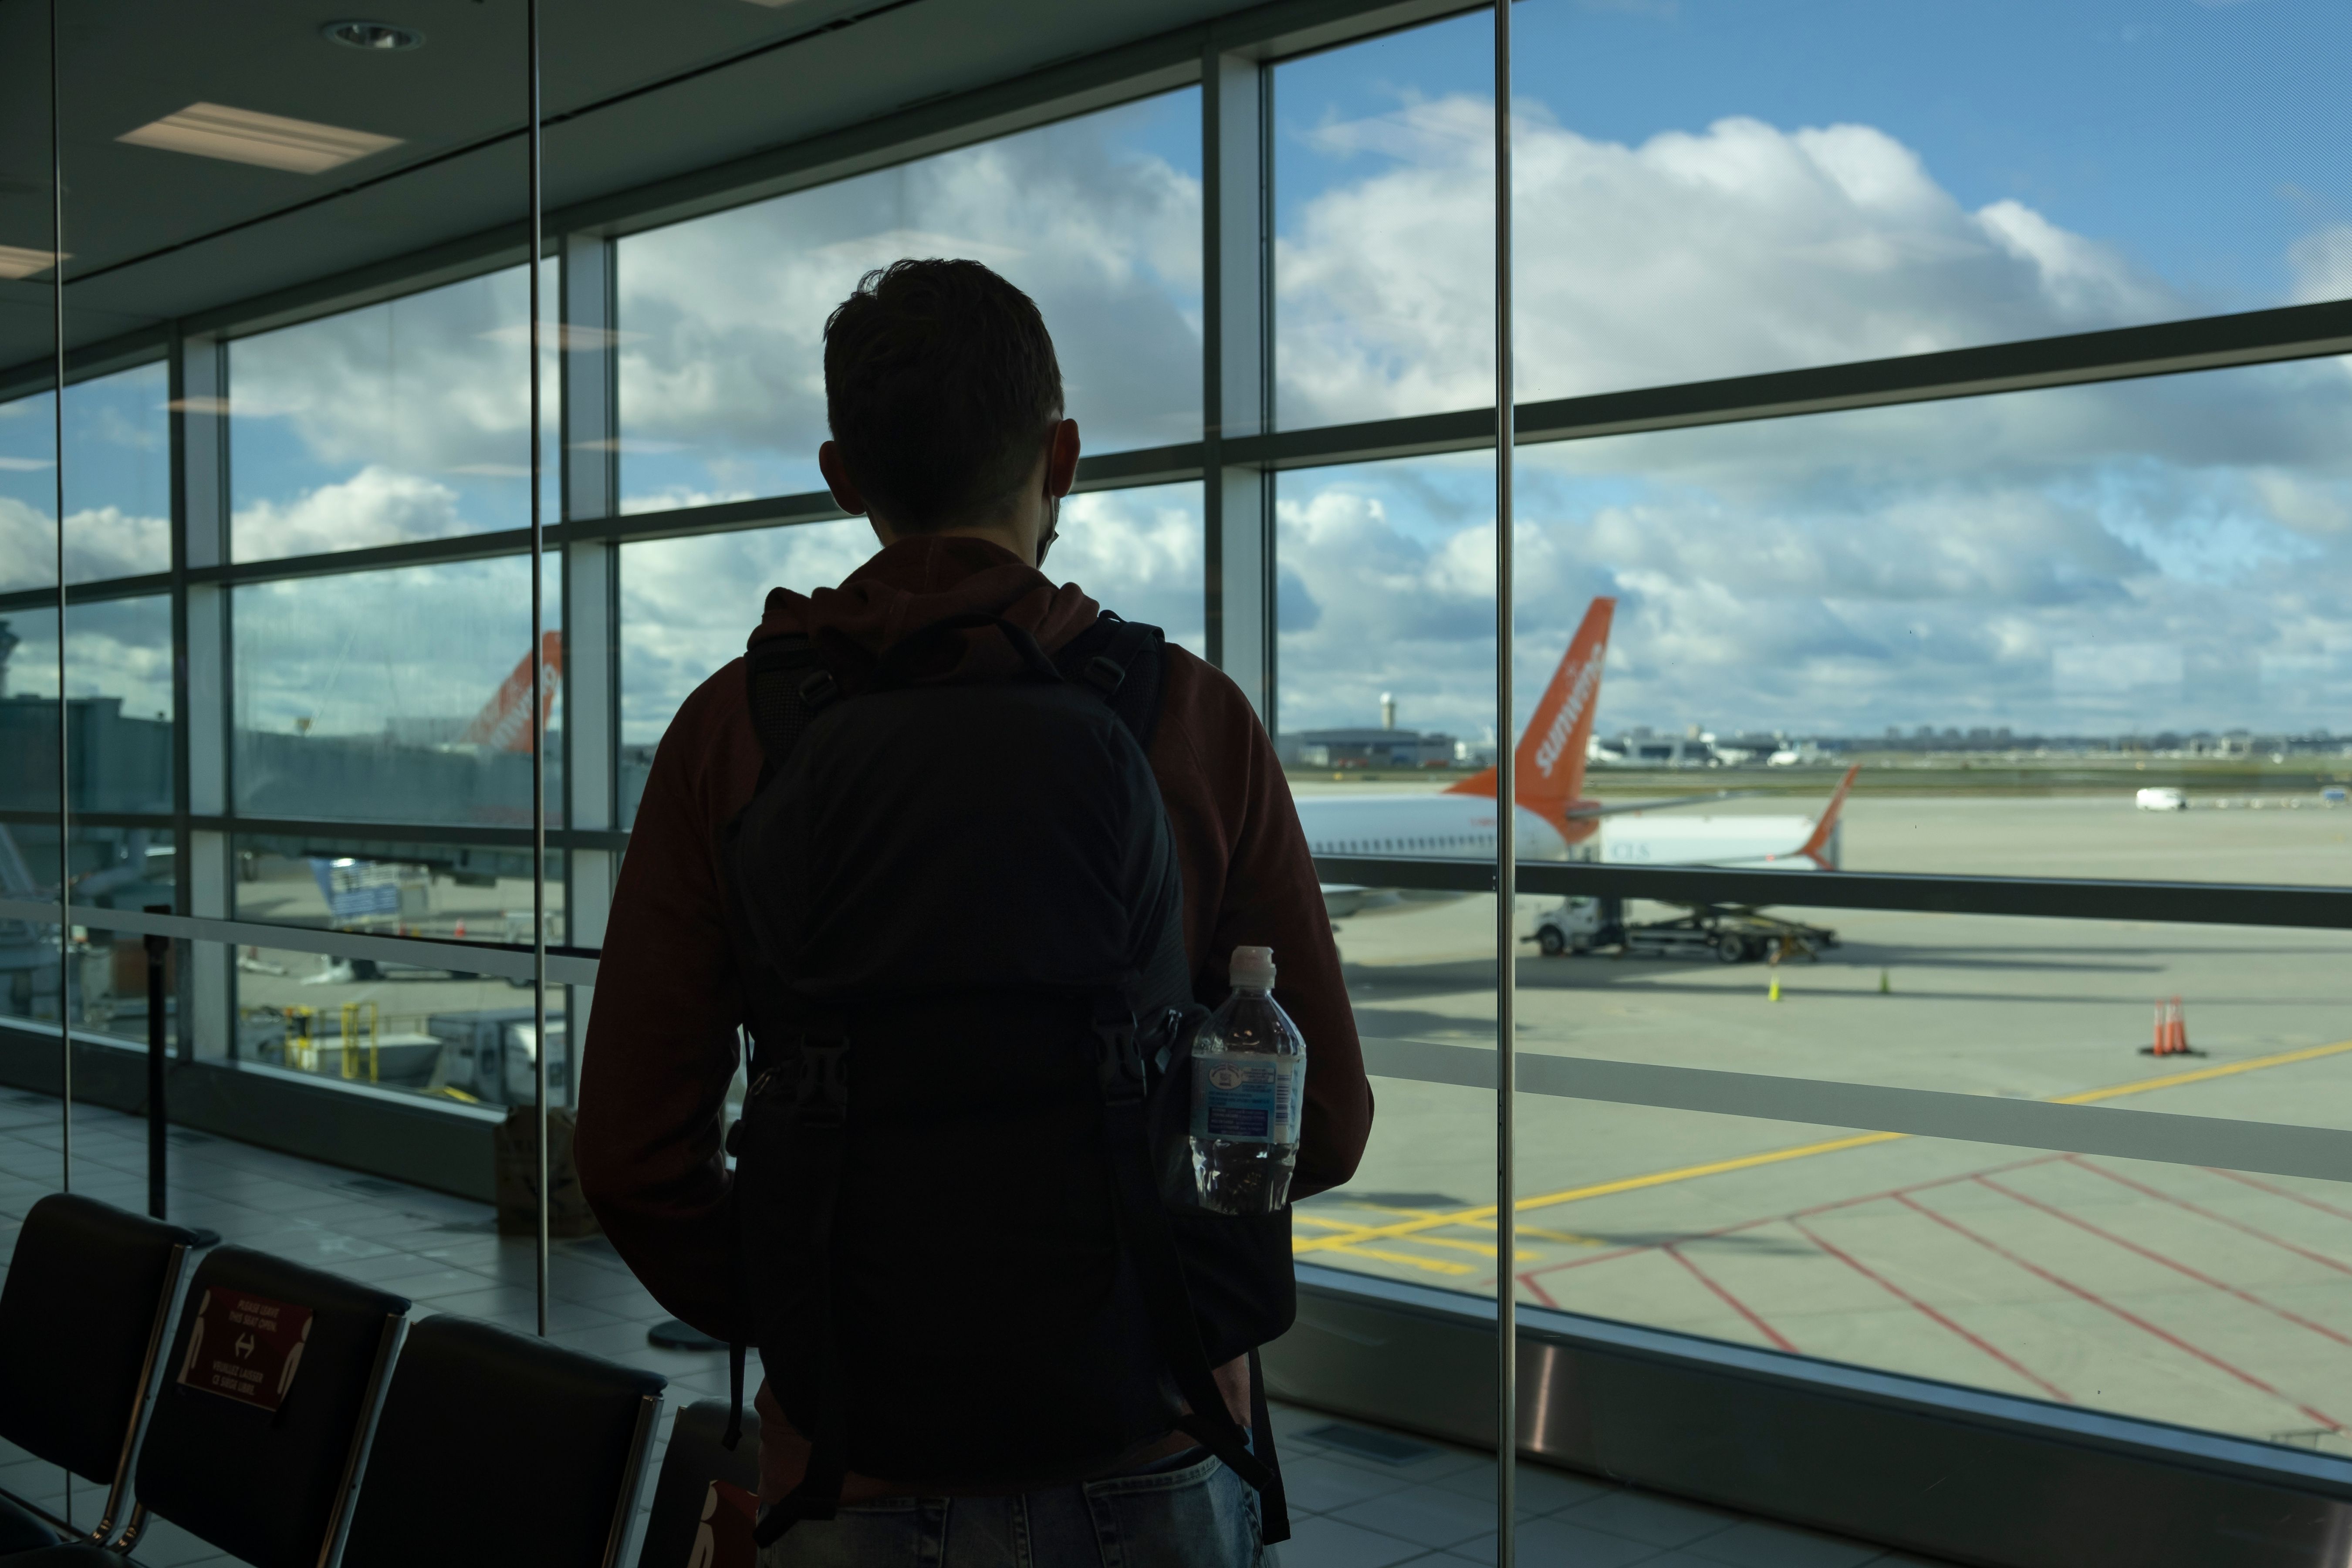 shutterstock_2087742370 - Silhouette of young man standing next to window at Pearson International airport, out of focus airplanes and runway in the background. Includes Sunwing Airline Boeing 737